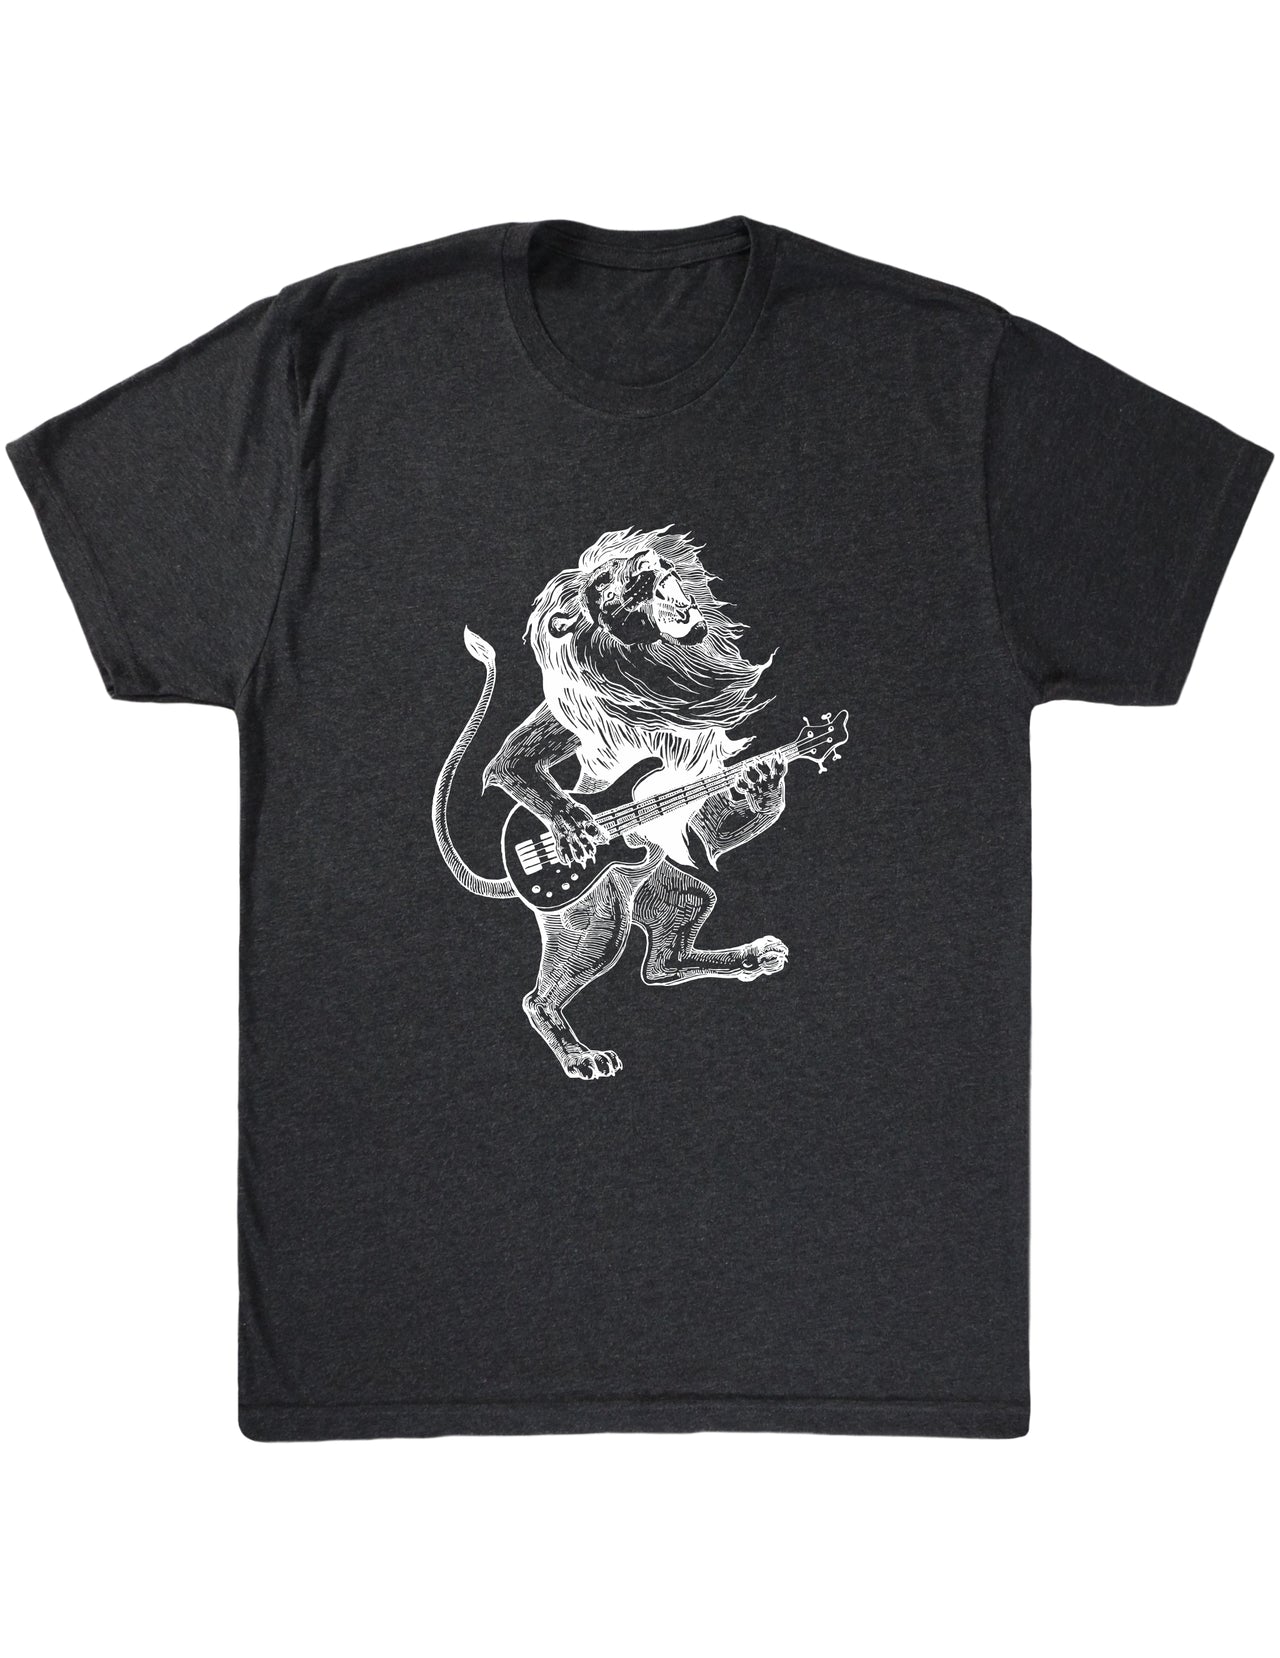 seembo-t-shirt-with-lion-playing-guitar-guitarist-art-in-a-vintage-black-color